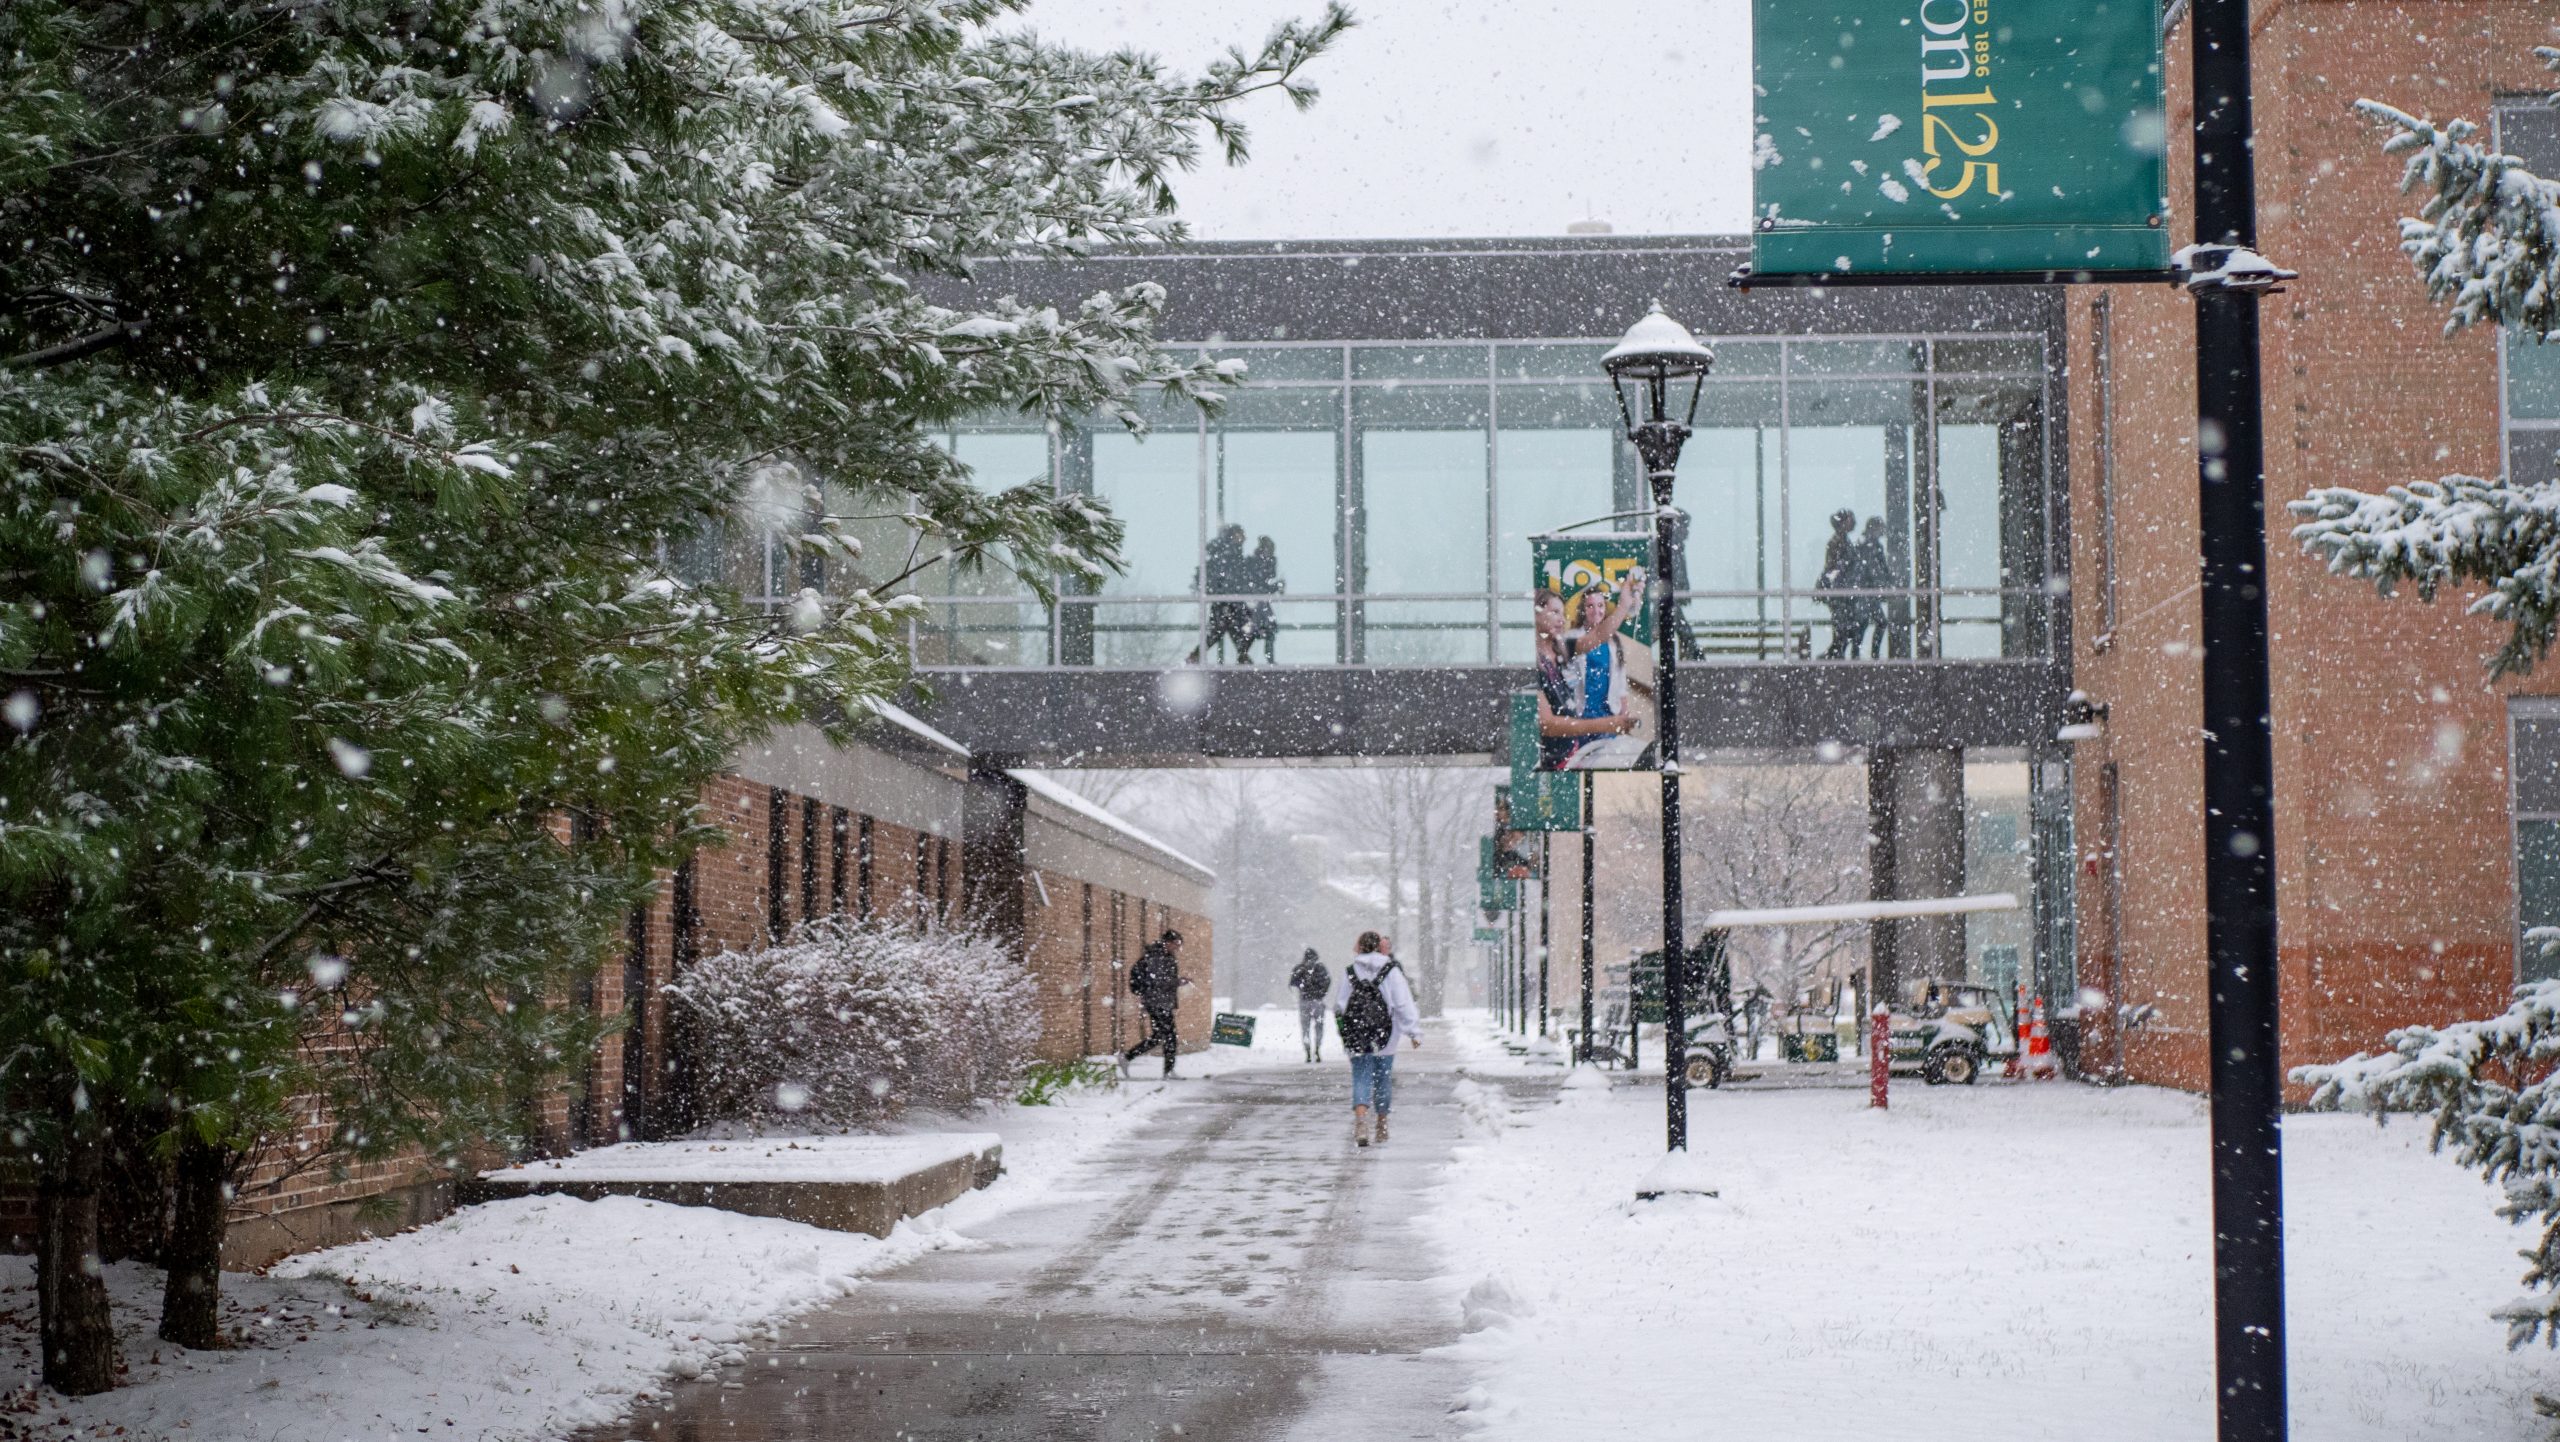 Students walk to class along a paved path on Clarkson's campus, while more students use an elevated indoor pathway to pass between buildings above the outdoor path.